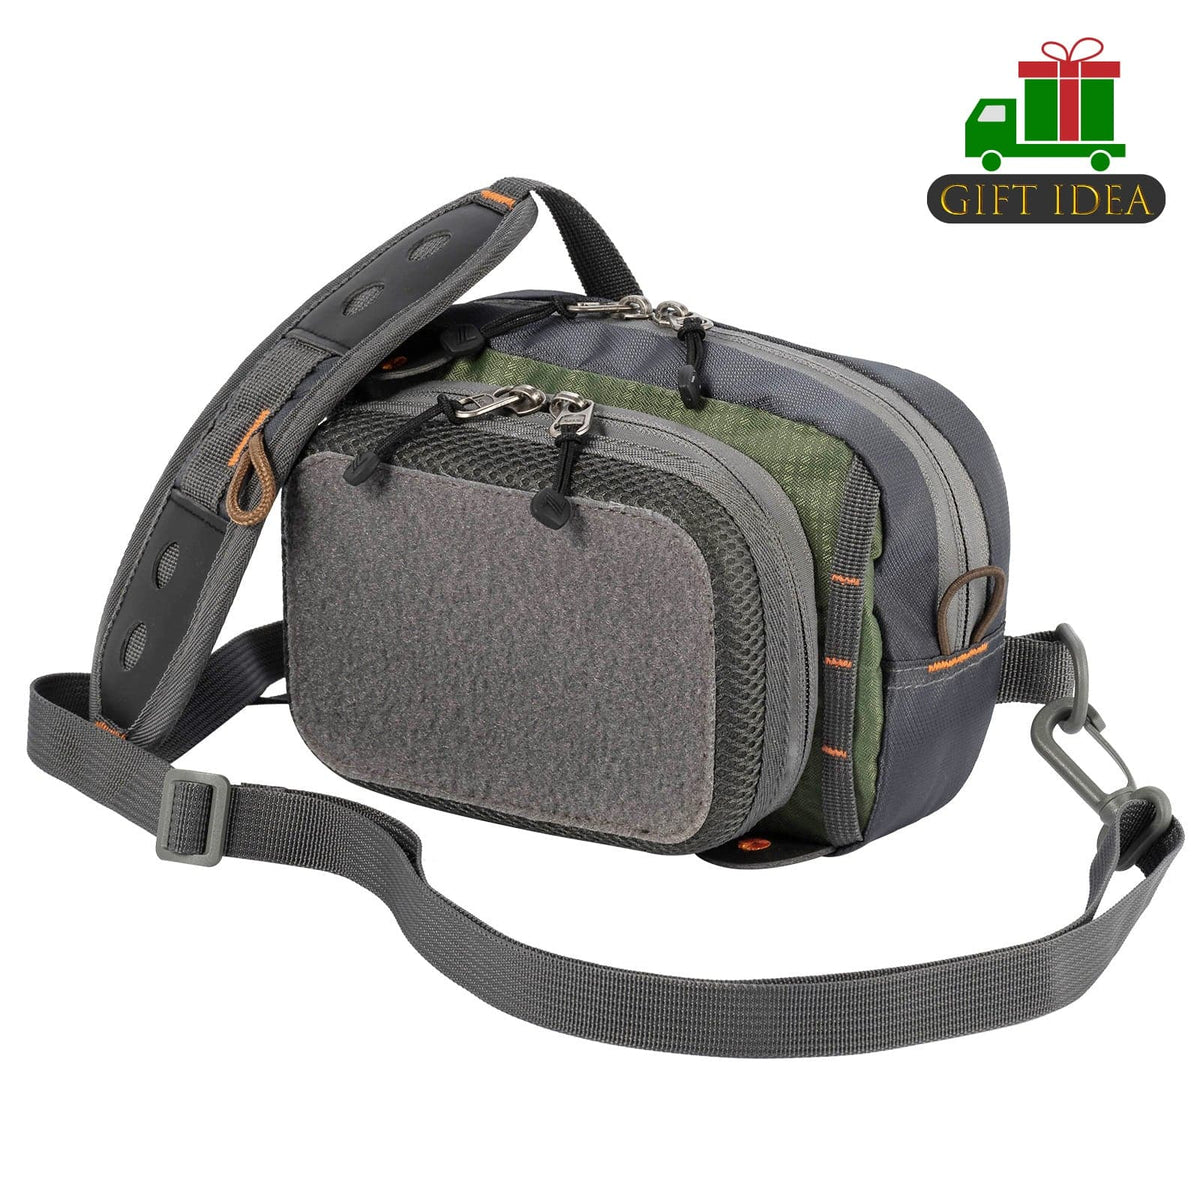 Maxcatch Fly Fishing Sling Pack Adjustable Size (V-comf Sling Pack)